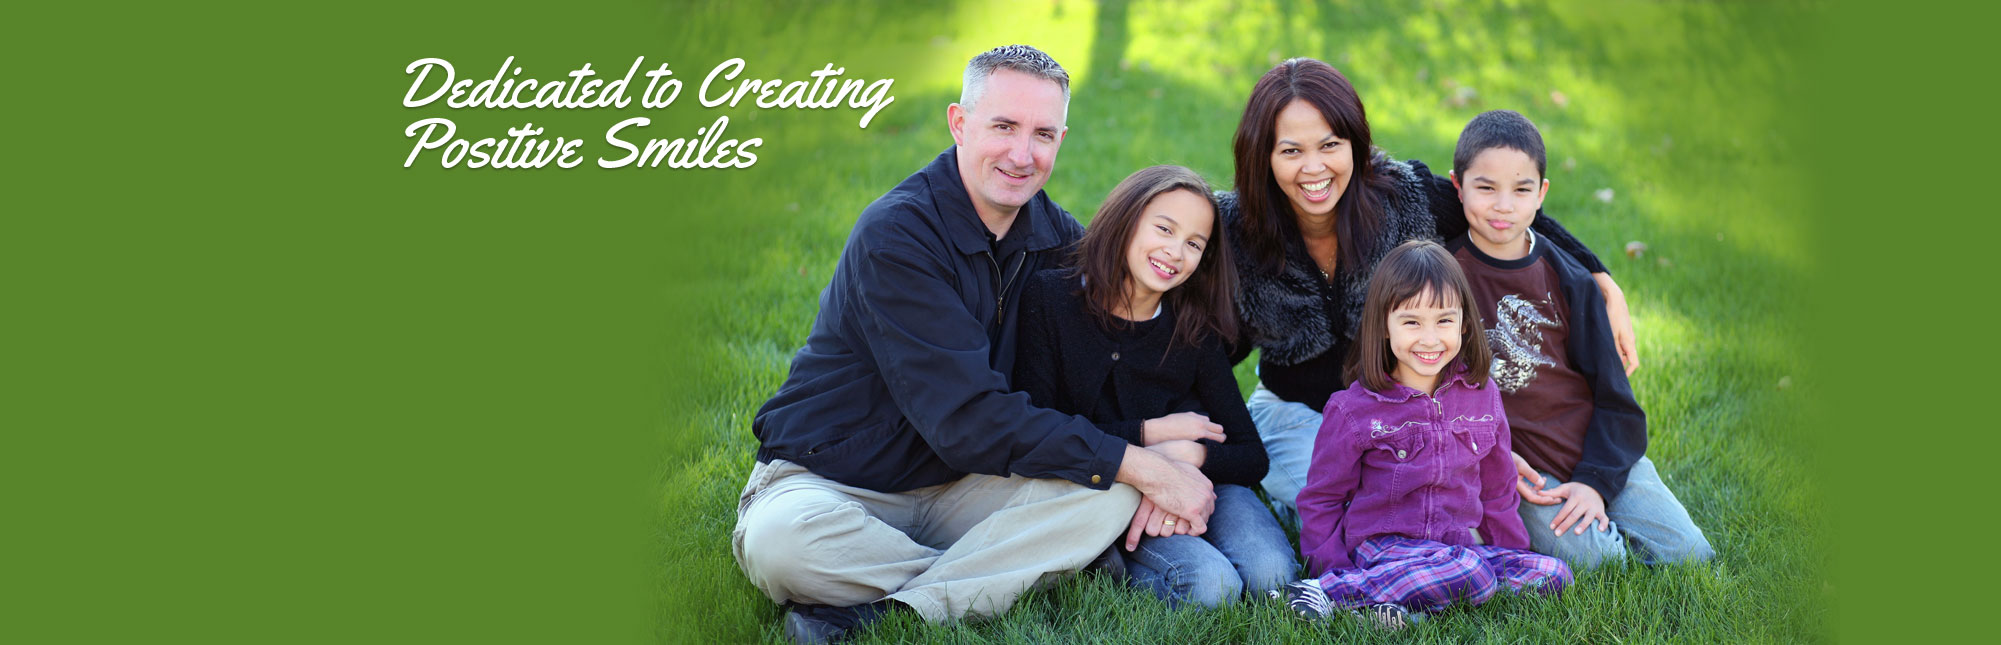 Similing family with young children sitting in the grass - Dedicated to Creating Positive Smiles